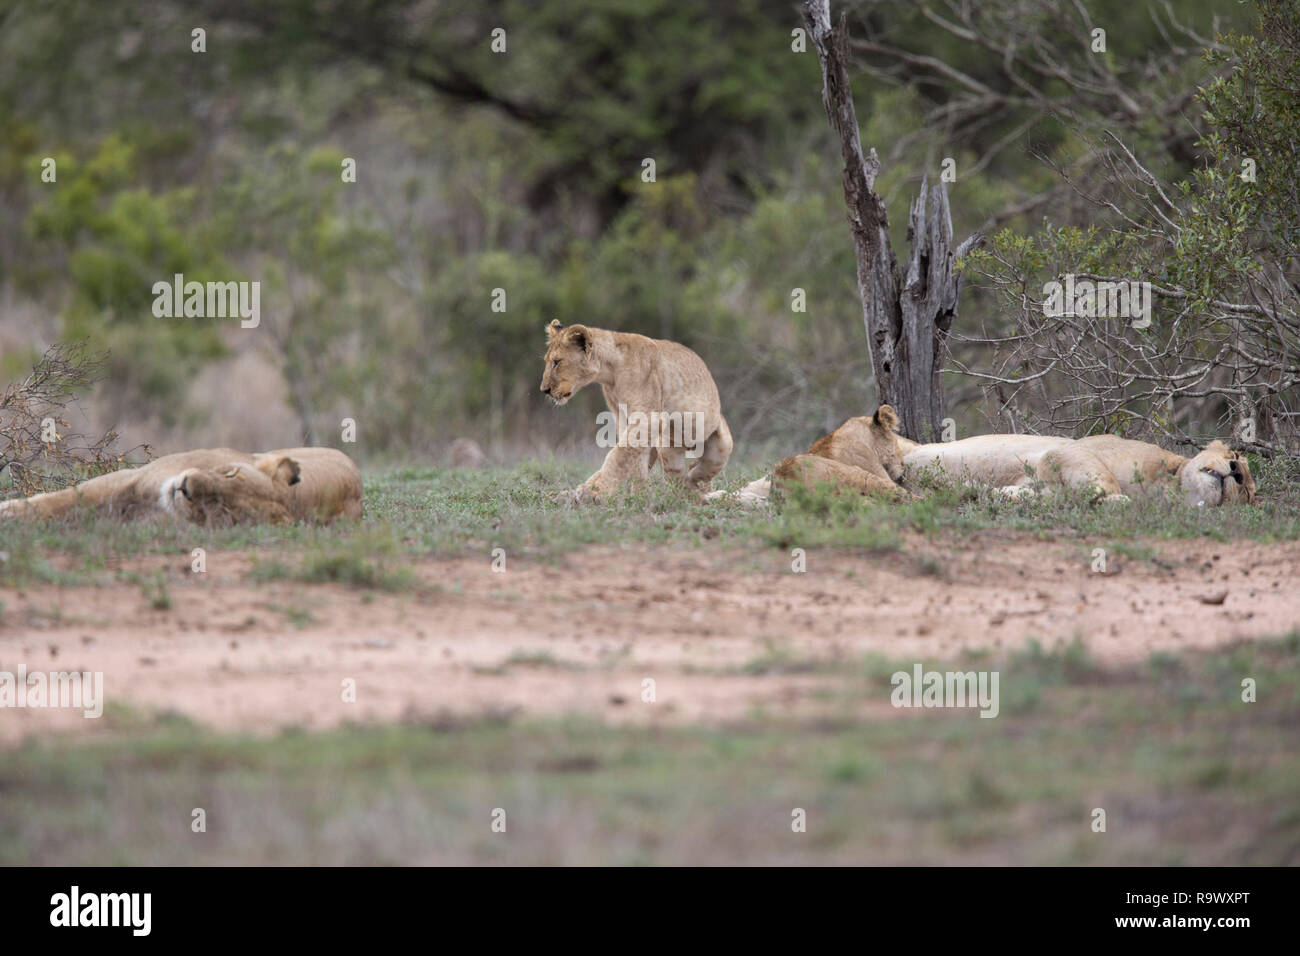 Lion cub walks between two sleeping lioness, Kruger National Park, South Africa. Stock Photo